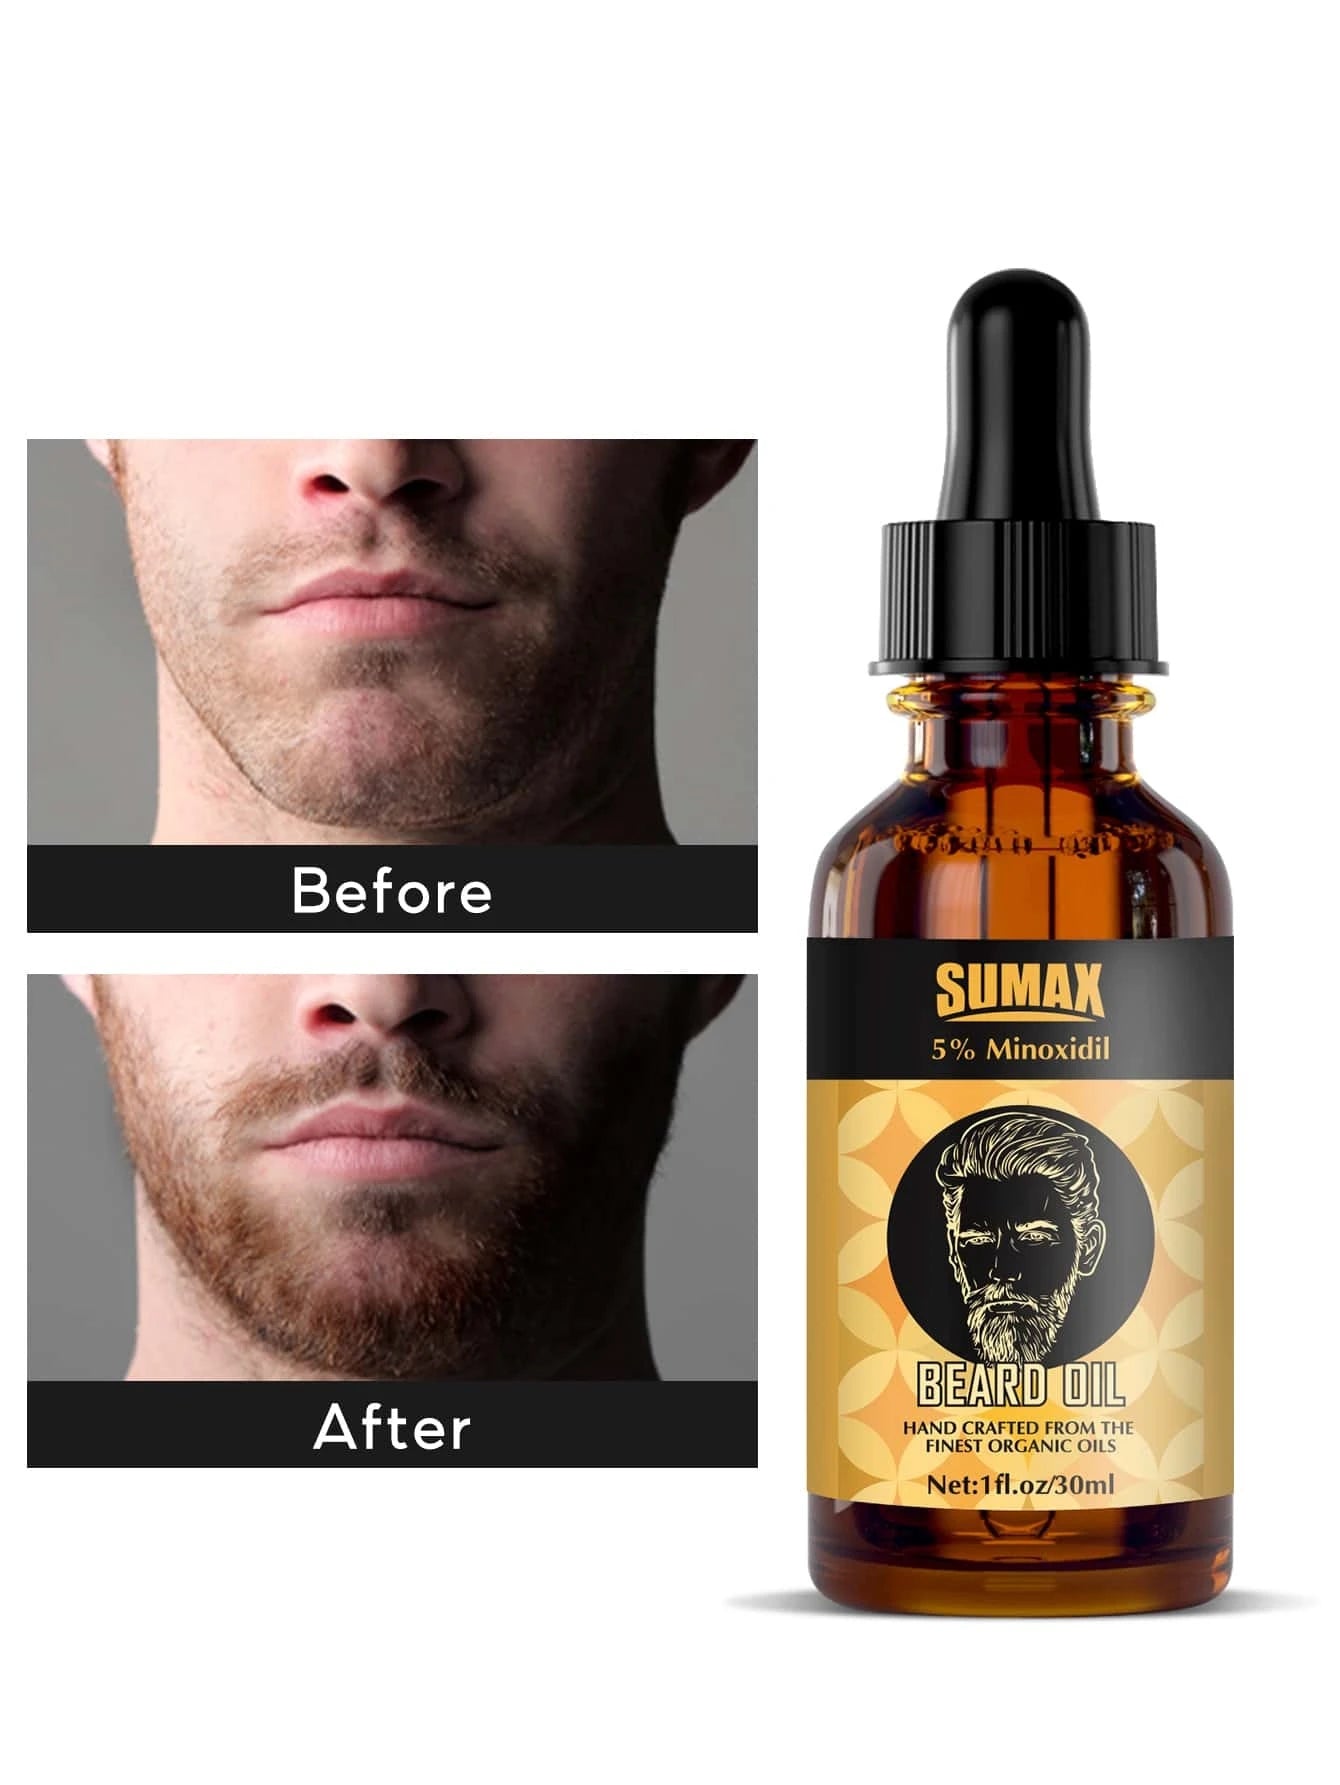 Professional Beard Care Kit with 5% Minoxidil and Smoothing Oil - Achieve a Smooth, Shiny Beard with Derma Roller and Professional Care